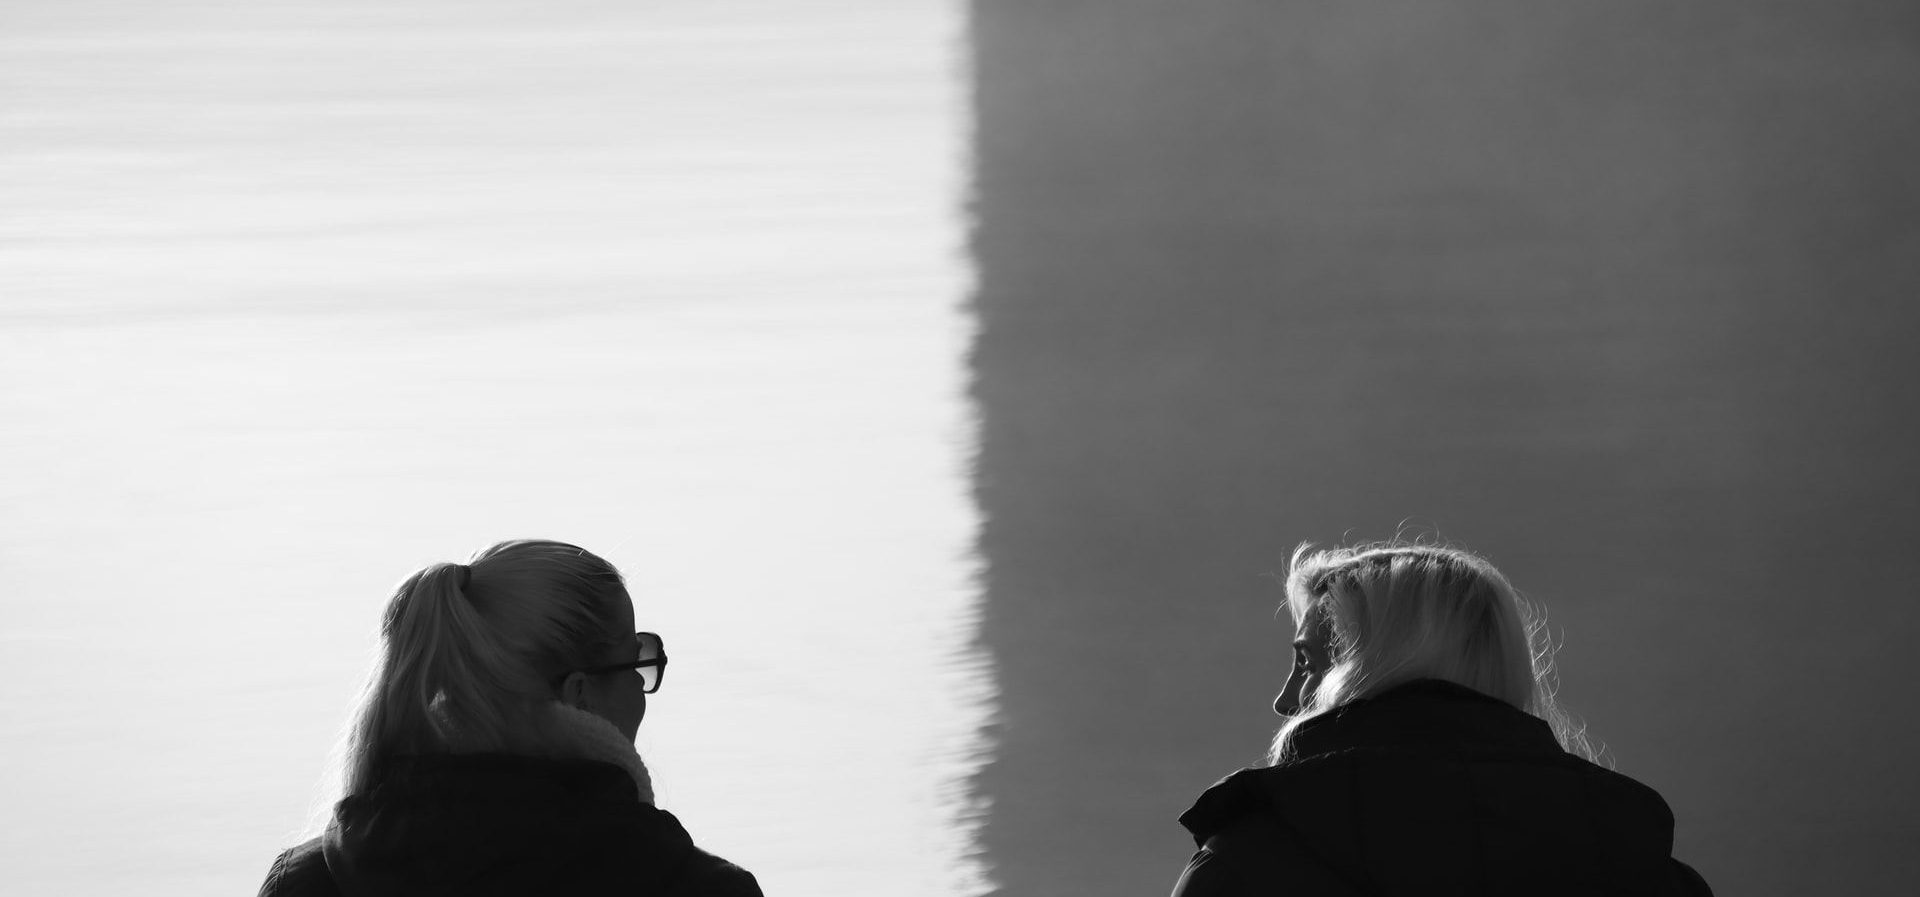 black and white photo of two people looking at each other, backs towards the viewer